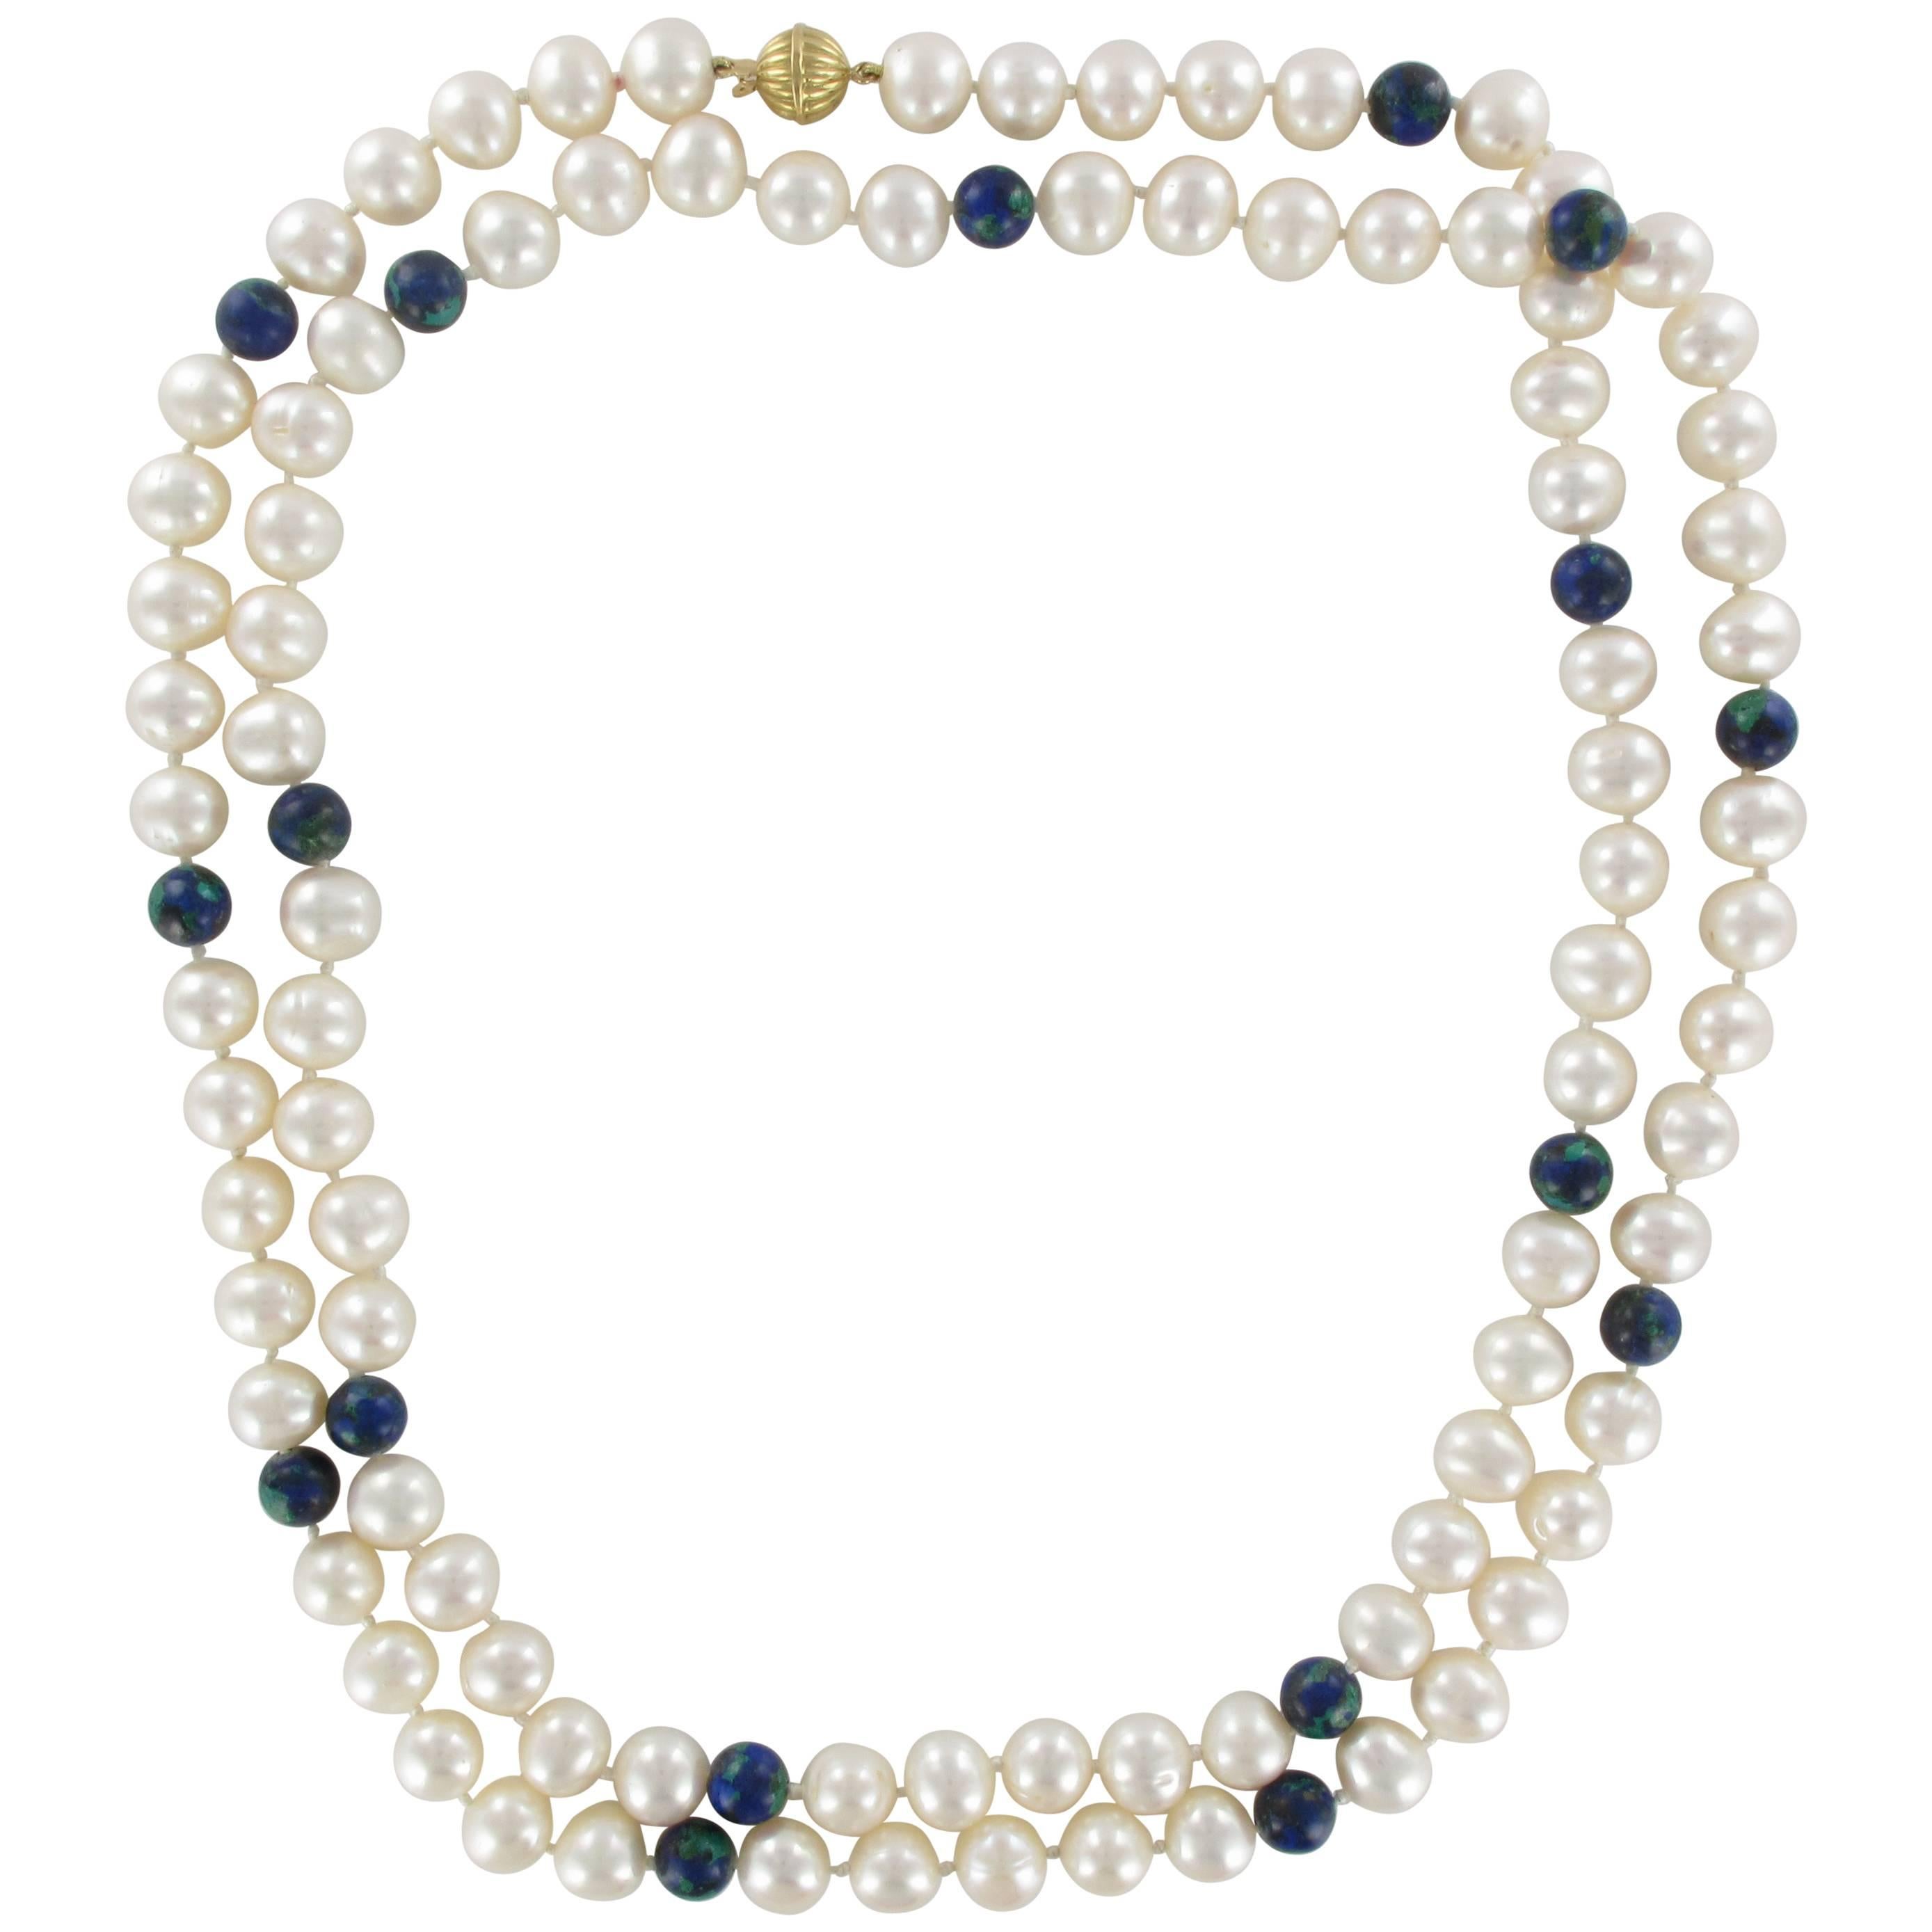 Superb Pearl and Azurite Long Necklace